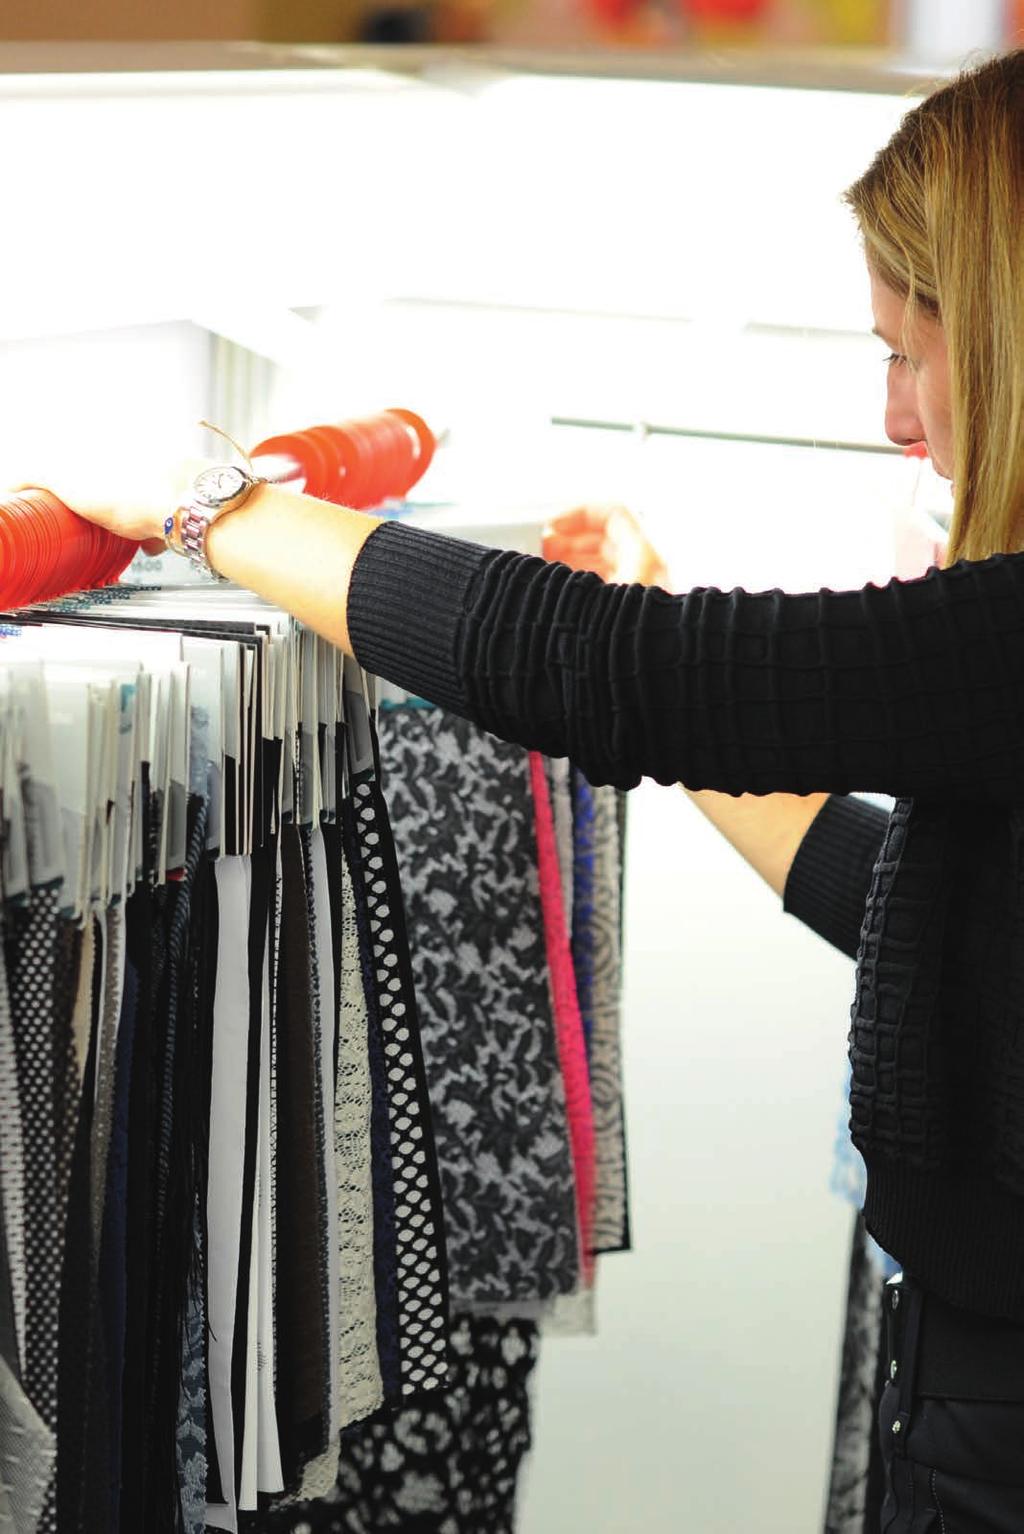 PREMIÈRE VISION FABRICS THE OFFER EXHIBITORS, a strong and above all selective, creative and innovative offer ALL PREMIÈRE VISION FABRICS EXHIBITORS MUST SATISFY REQUIREMENTS As to quality,